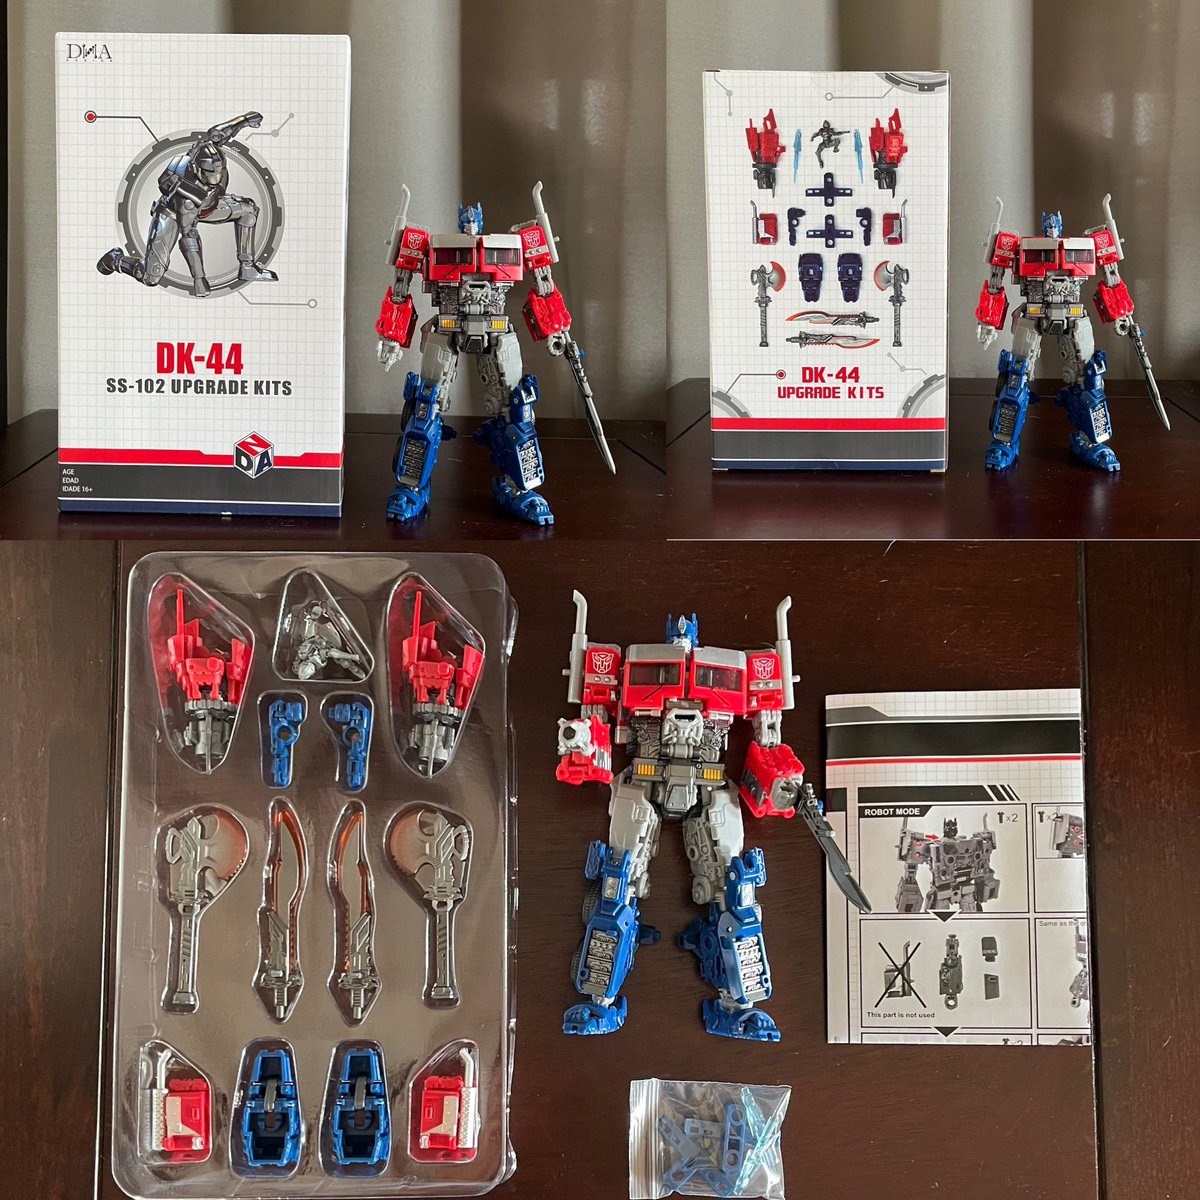 OH it’s here! I’ve been waiting for my upgrade kit for my #OptimusPrime! I’m just going to be messing around with this all afternoon. #TilAllAreONE #Transformers